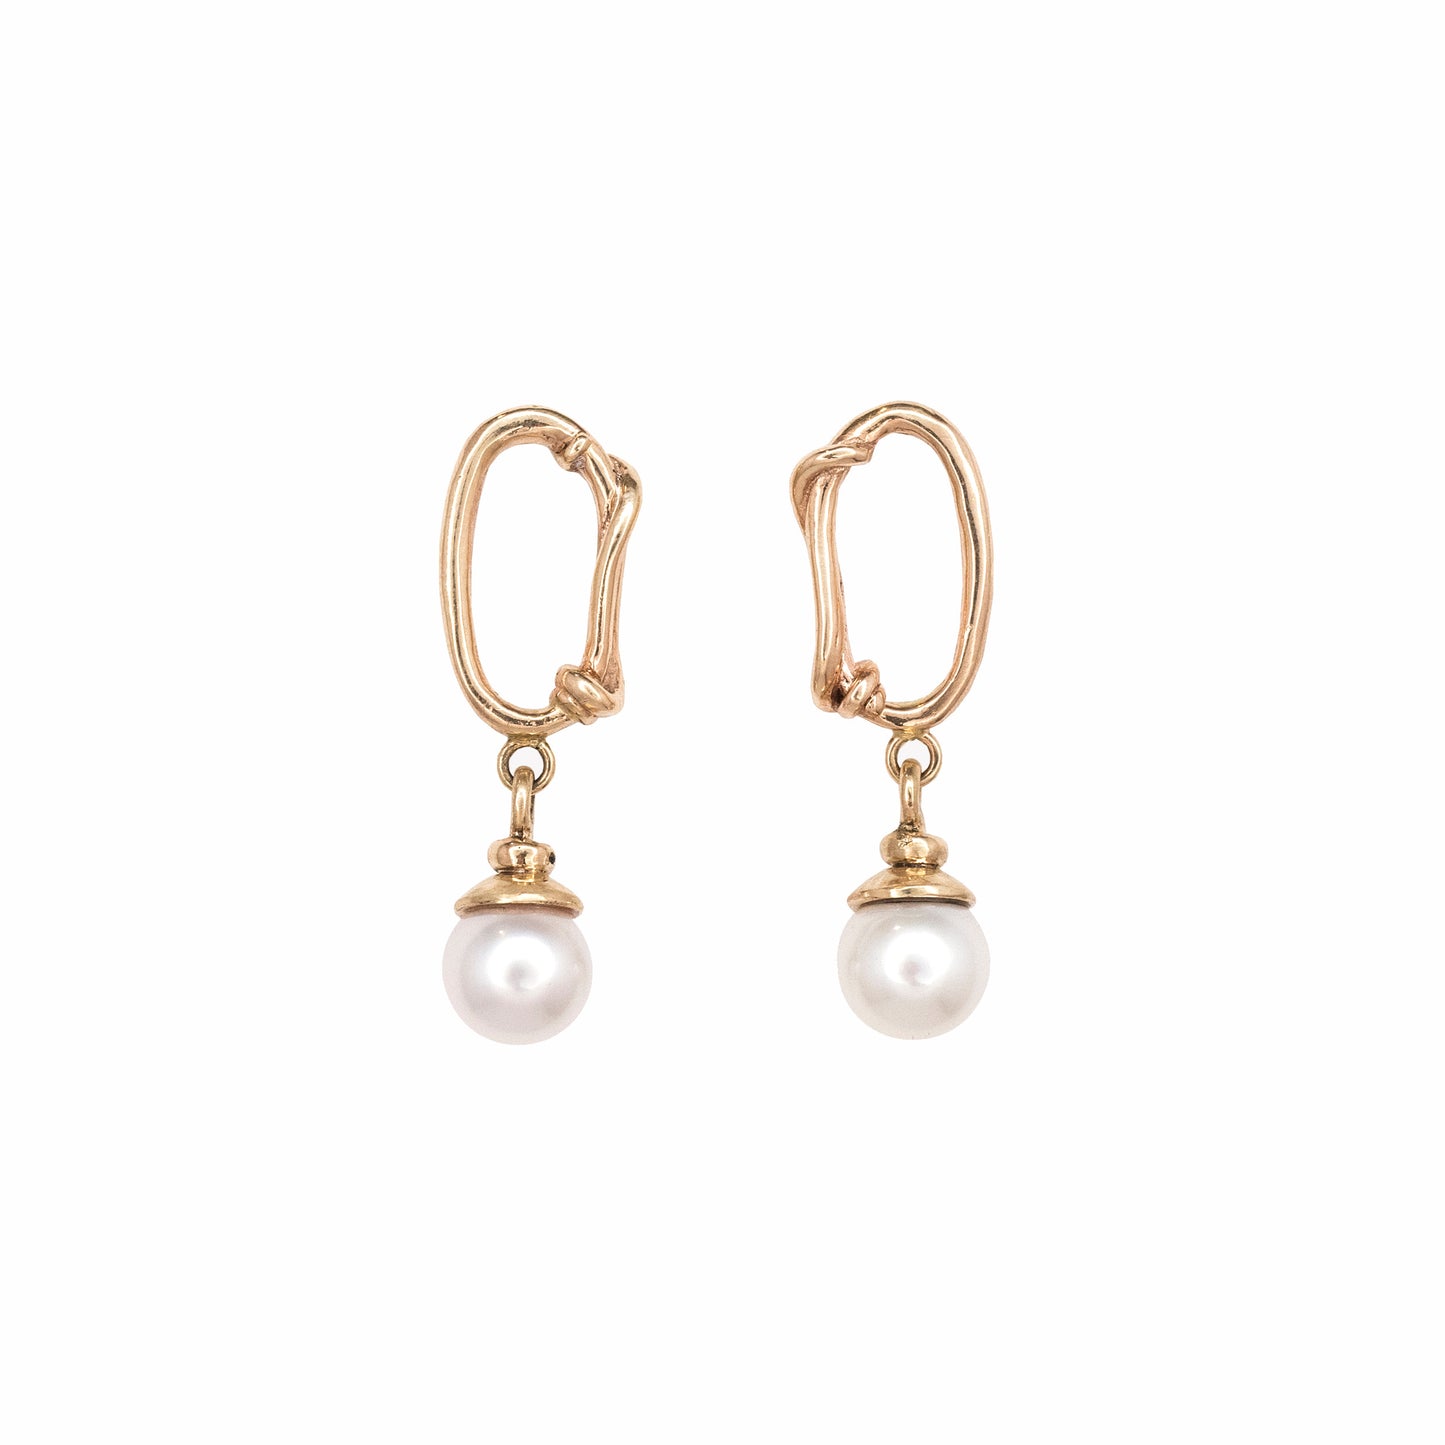 14k Oval Link Yellow or White Gold Posts with Round Akoya Pearl